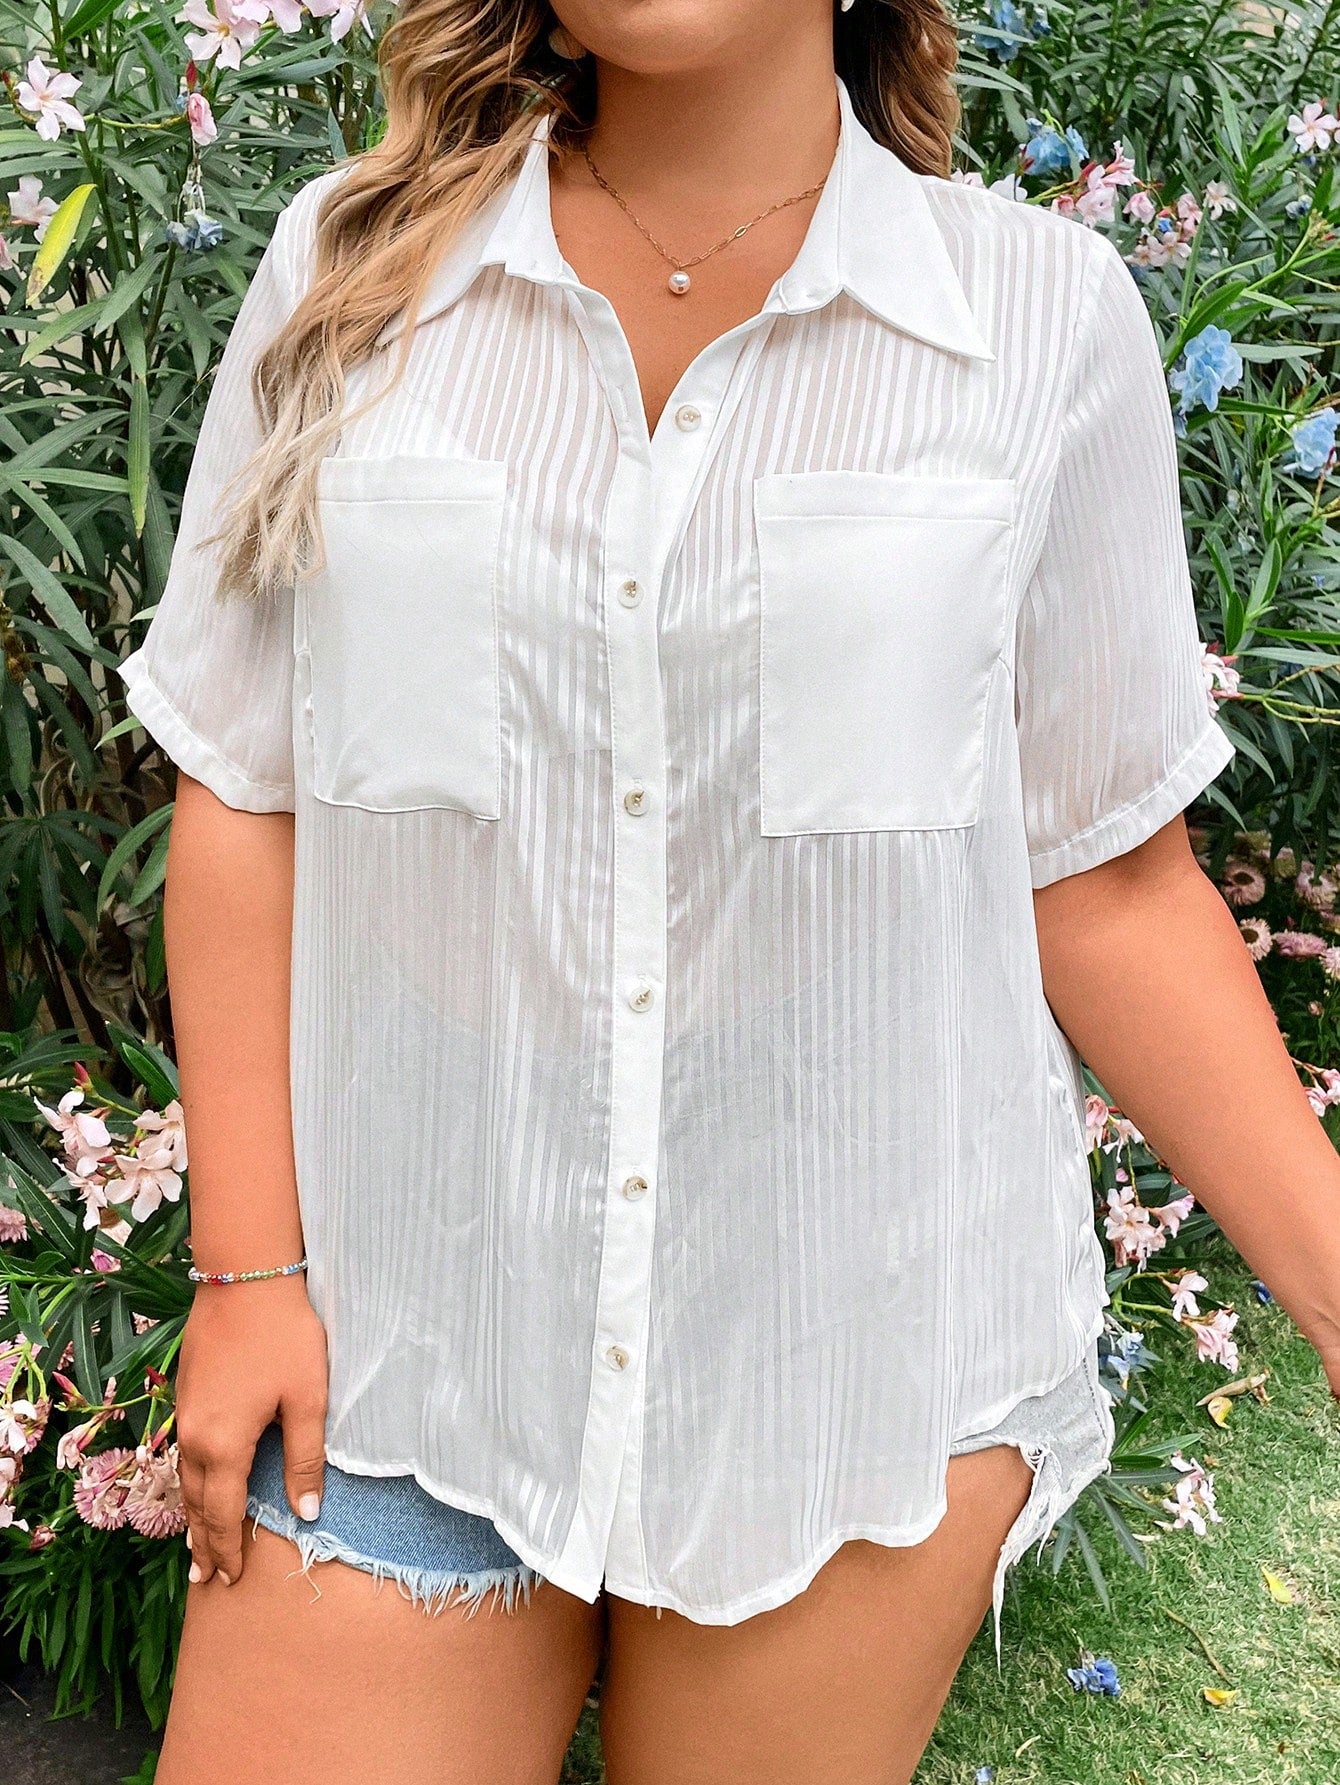 Plus Size Women's Solid Color Short Sleeve Shirt With Pocket